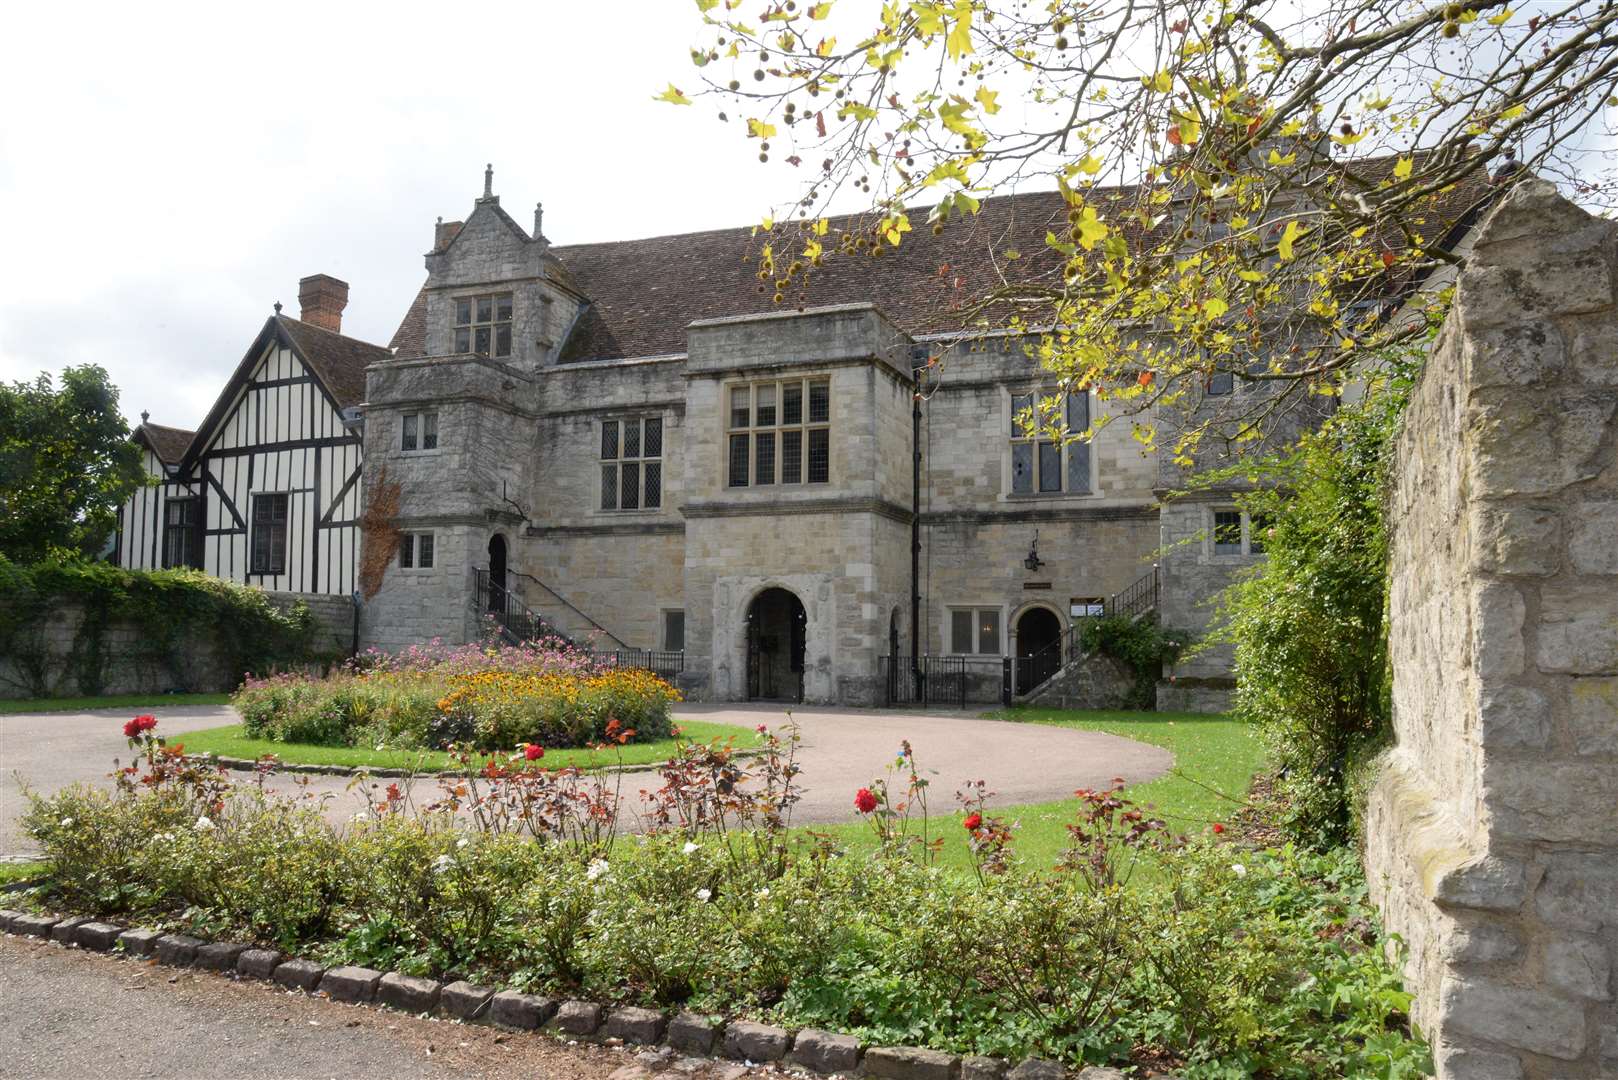 The Archbishops Palace in Mill Street, Maidstone.